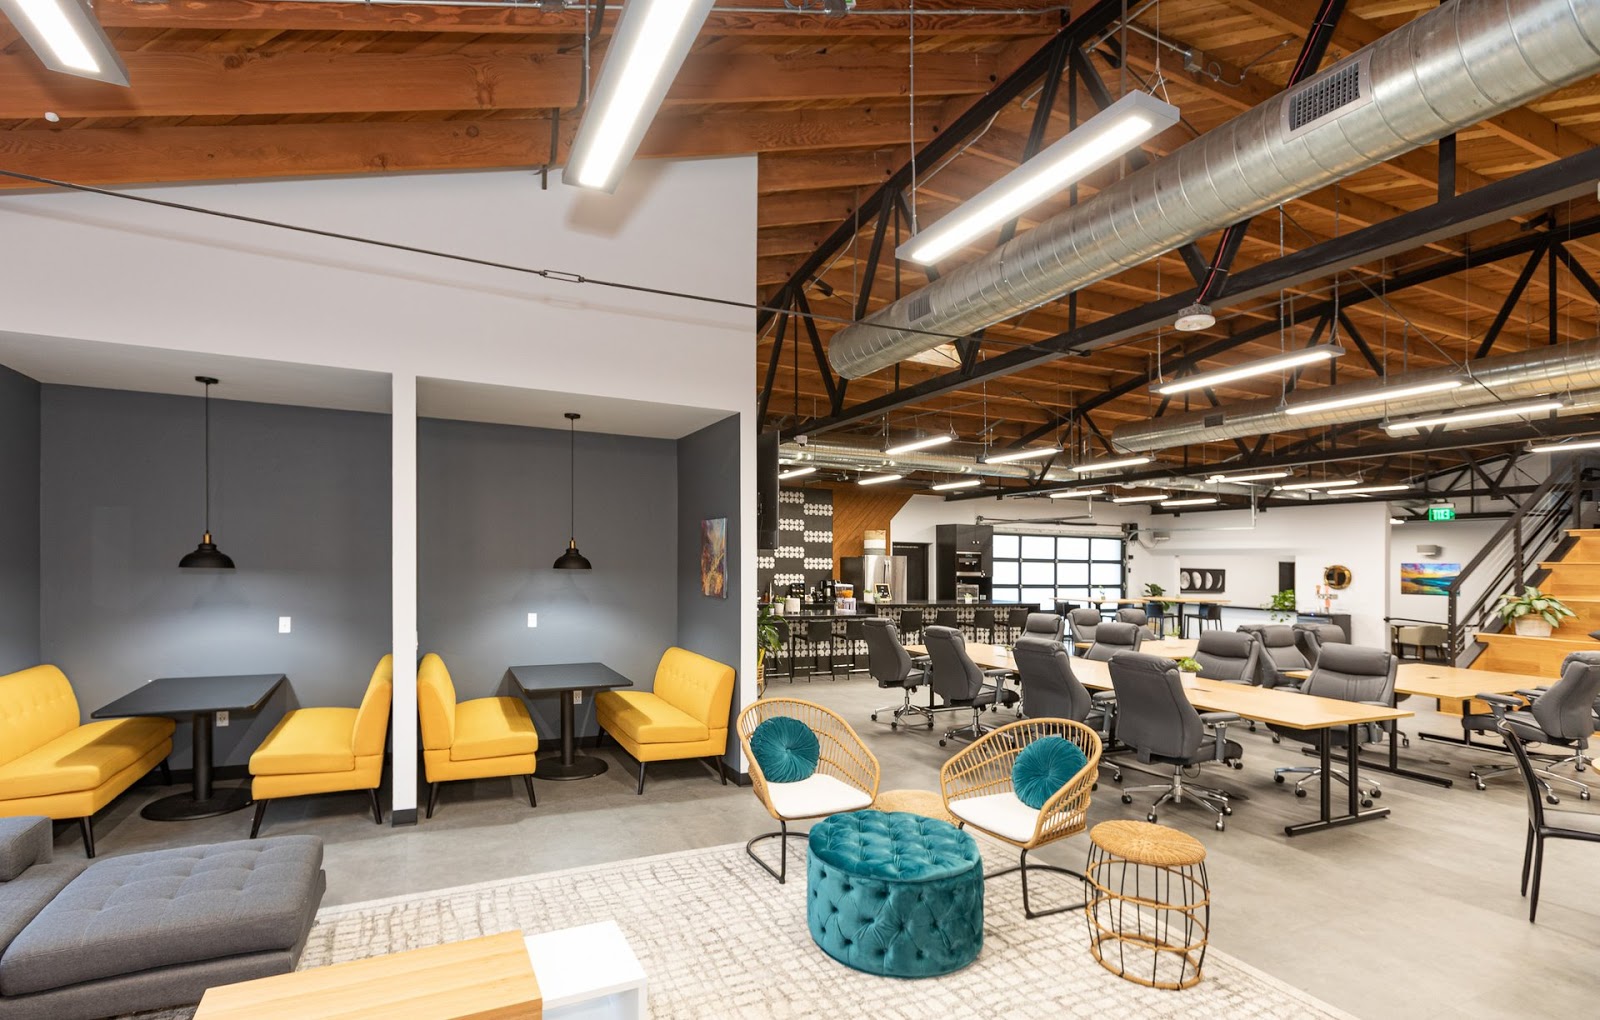 Coworking Space Design: 11 Ideas for a Shared Office | Avanti Systems